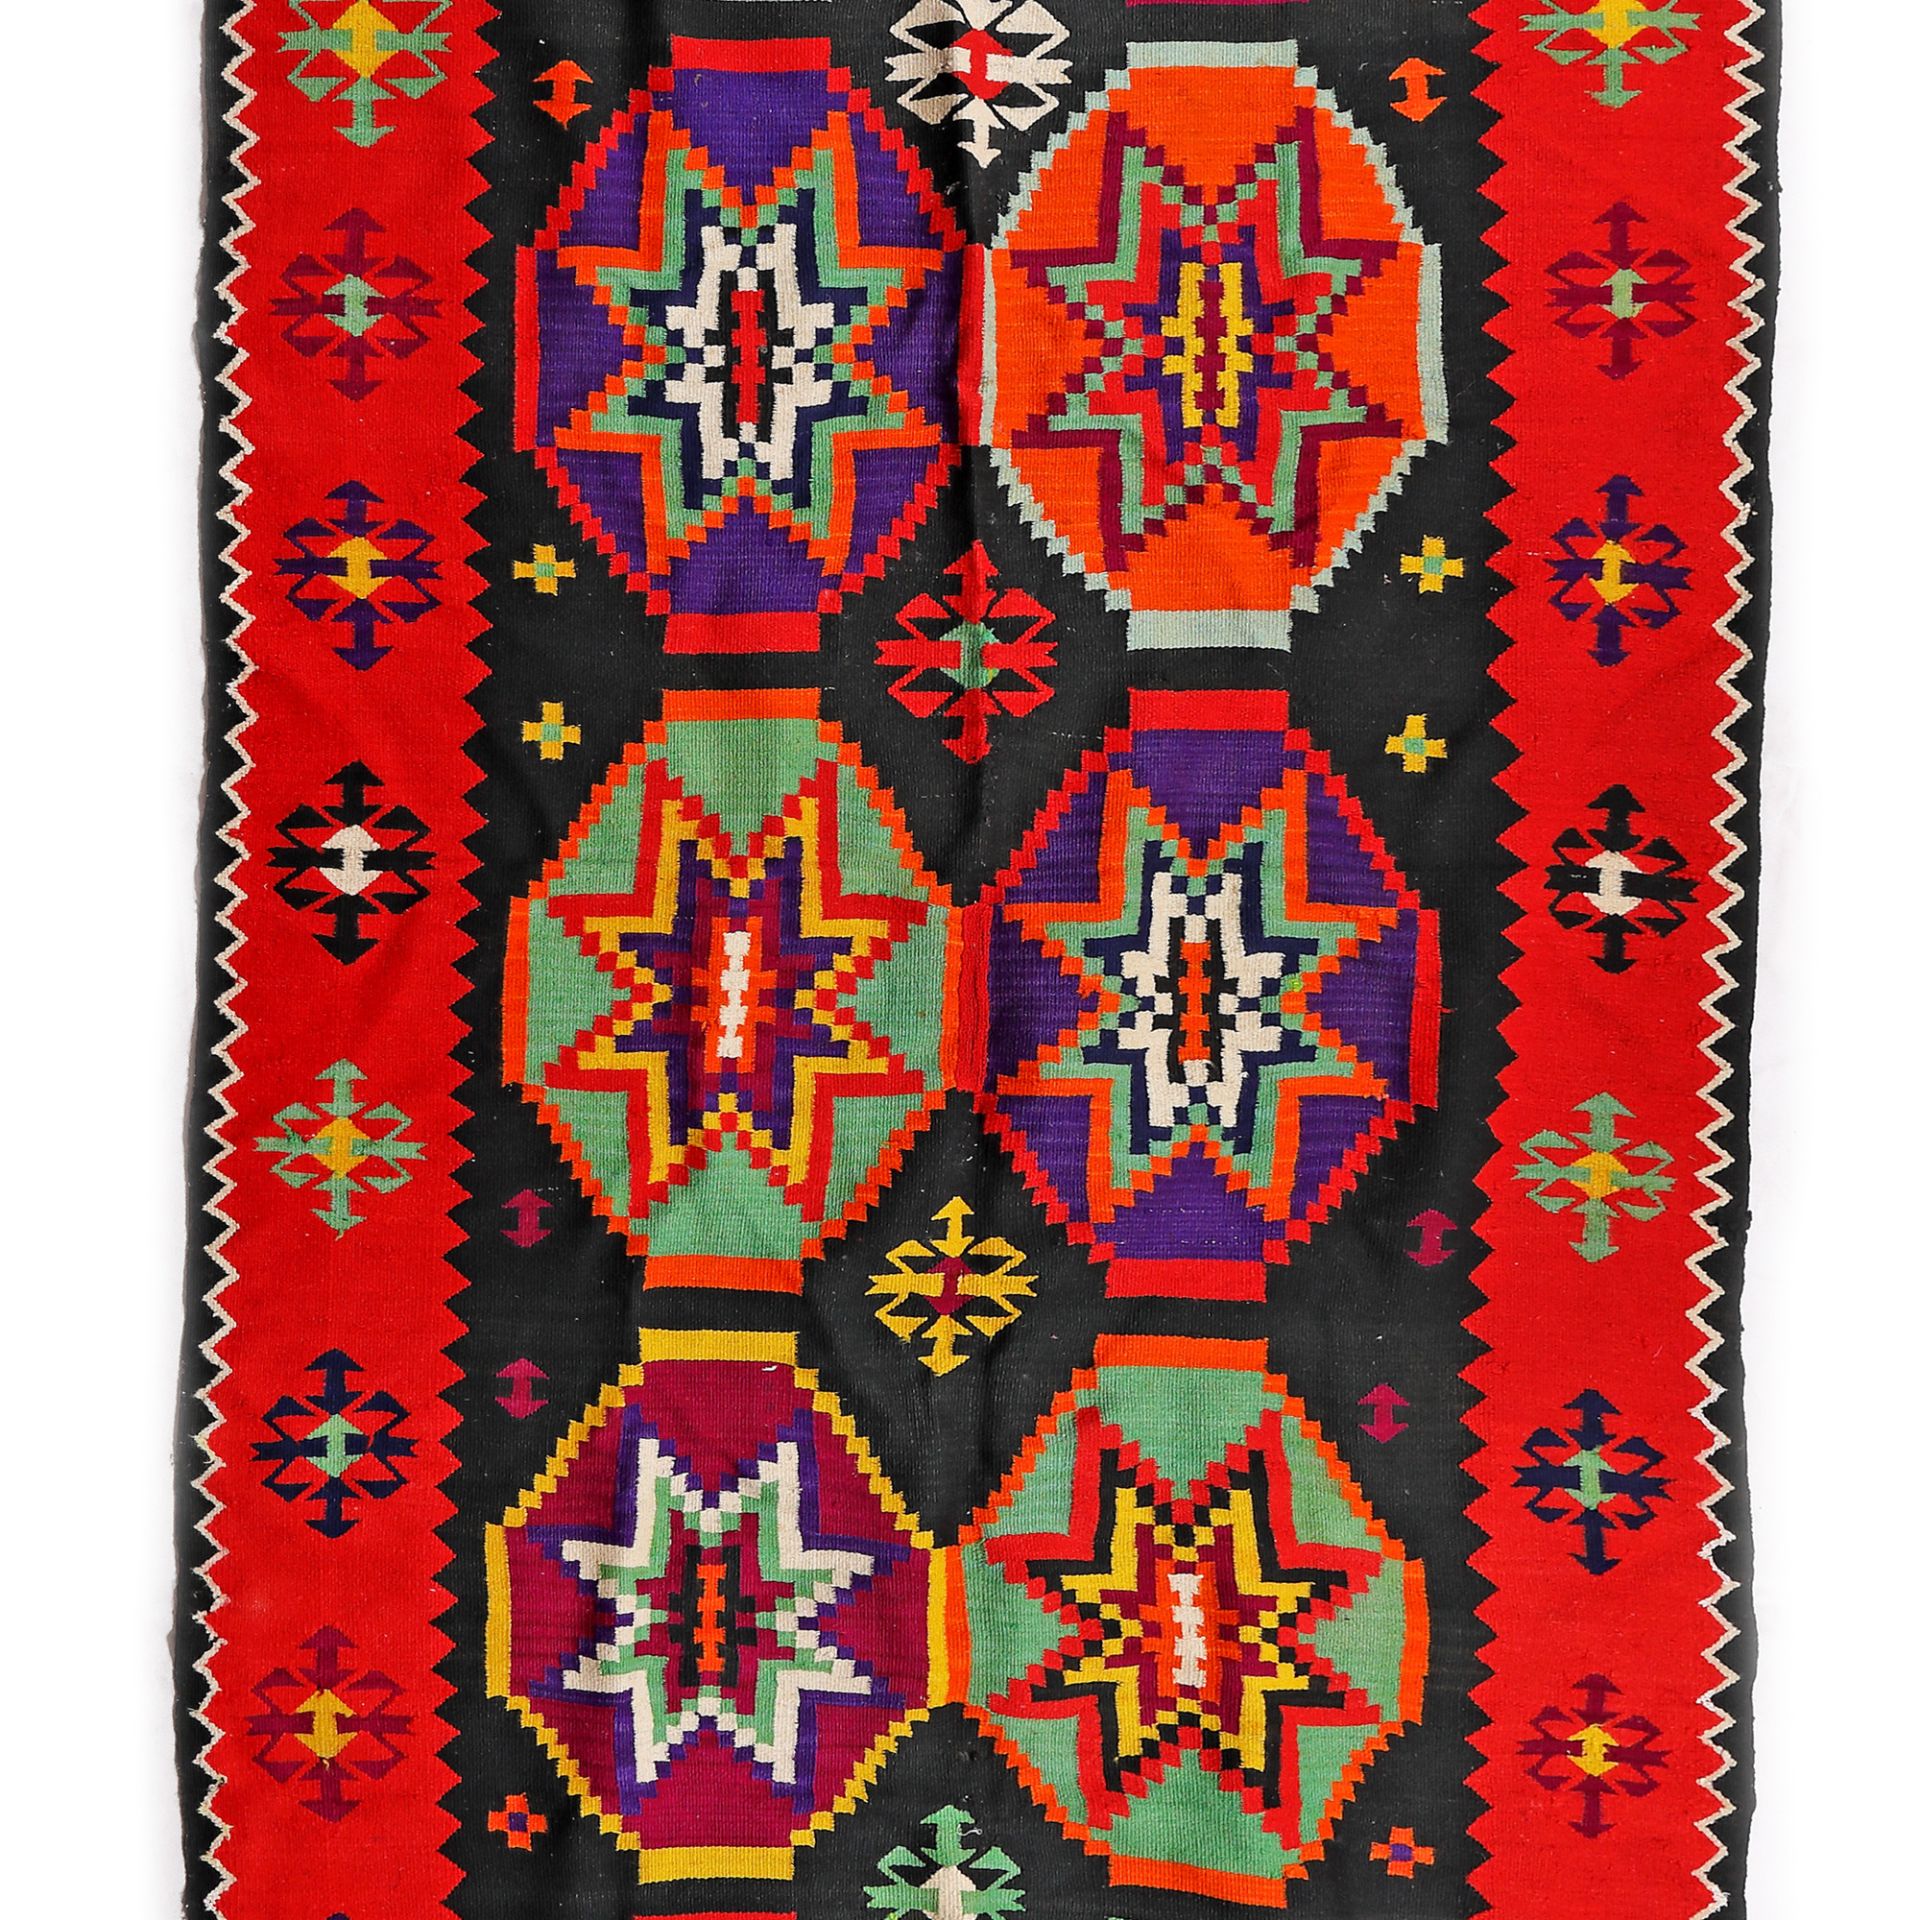 Wallachian wool rug, decorated with geometrical motifs, mid-20th century - Image 2 of 2